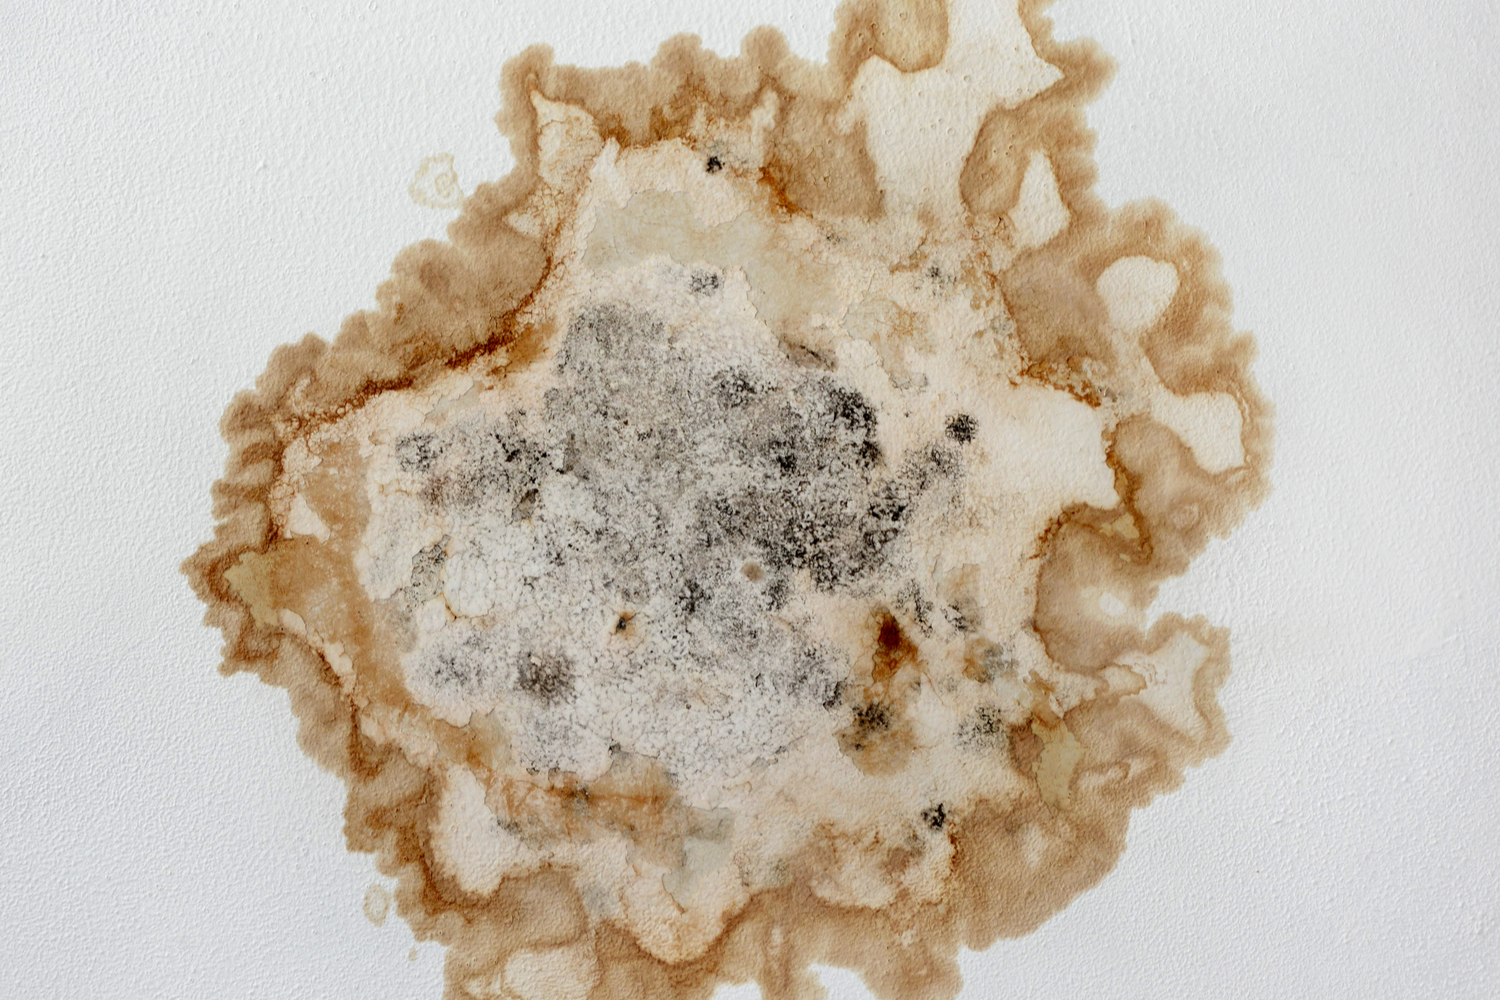 Five Types of Mold That are Harmful to You